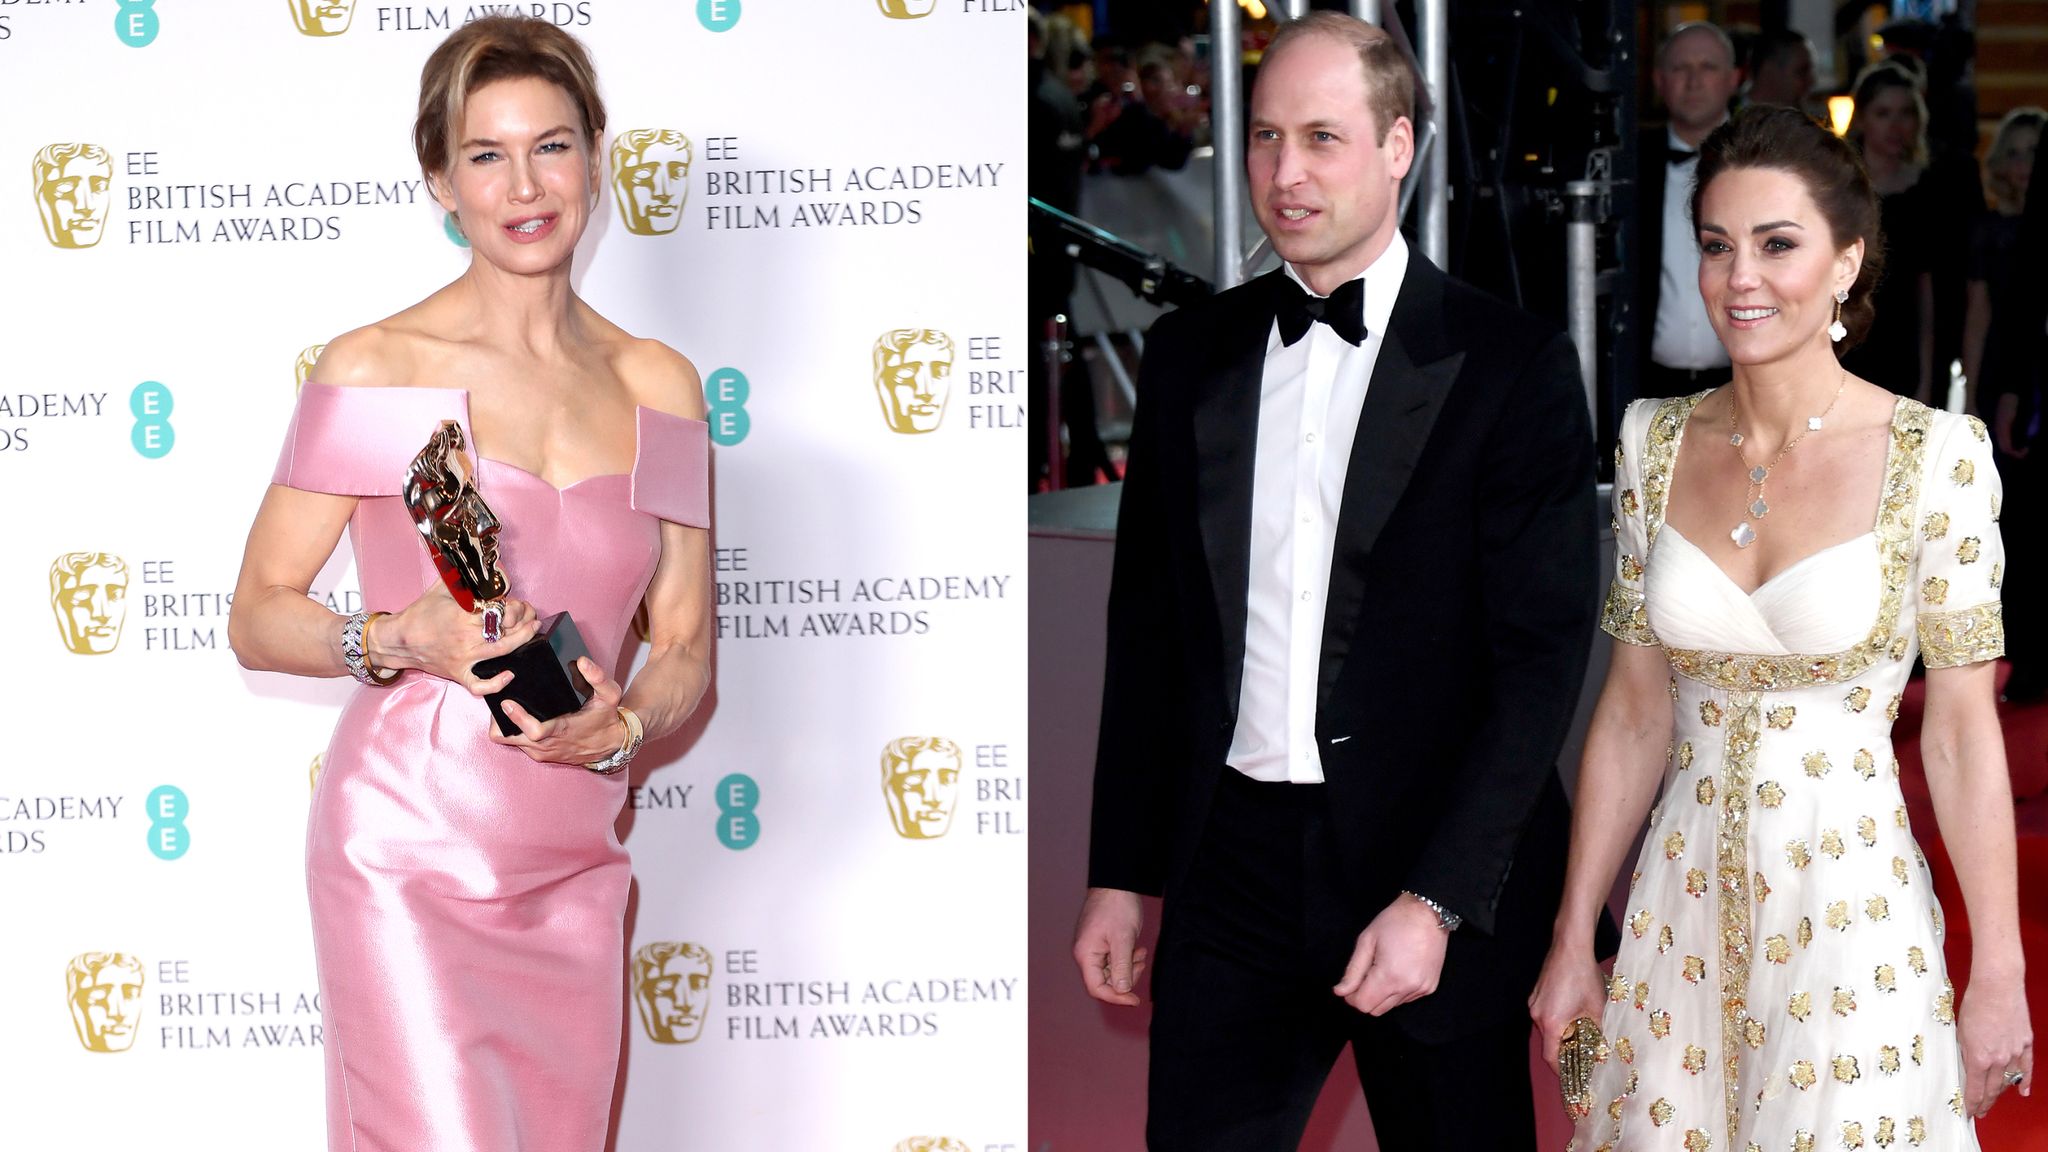 Brad Pitt, Bridget Jones and royal jokes in front of Prince William: 12 stand out BAFTA moments